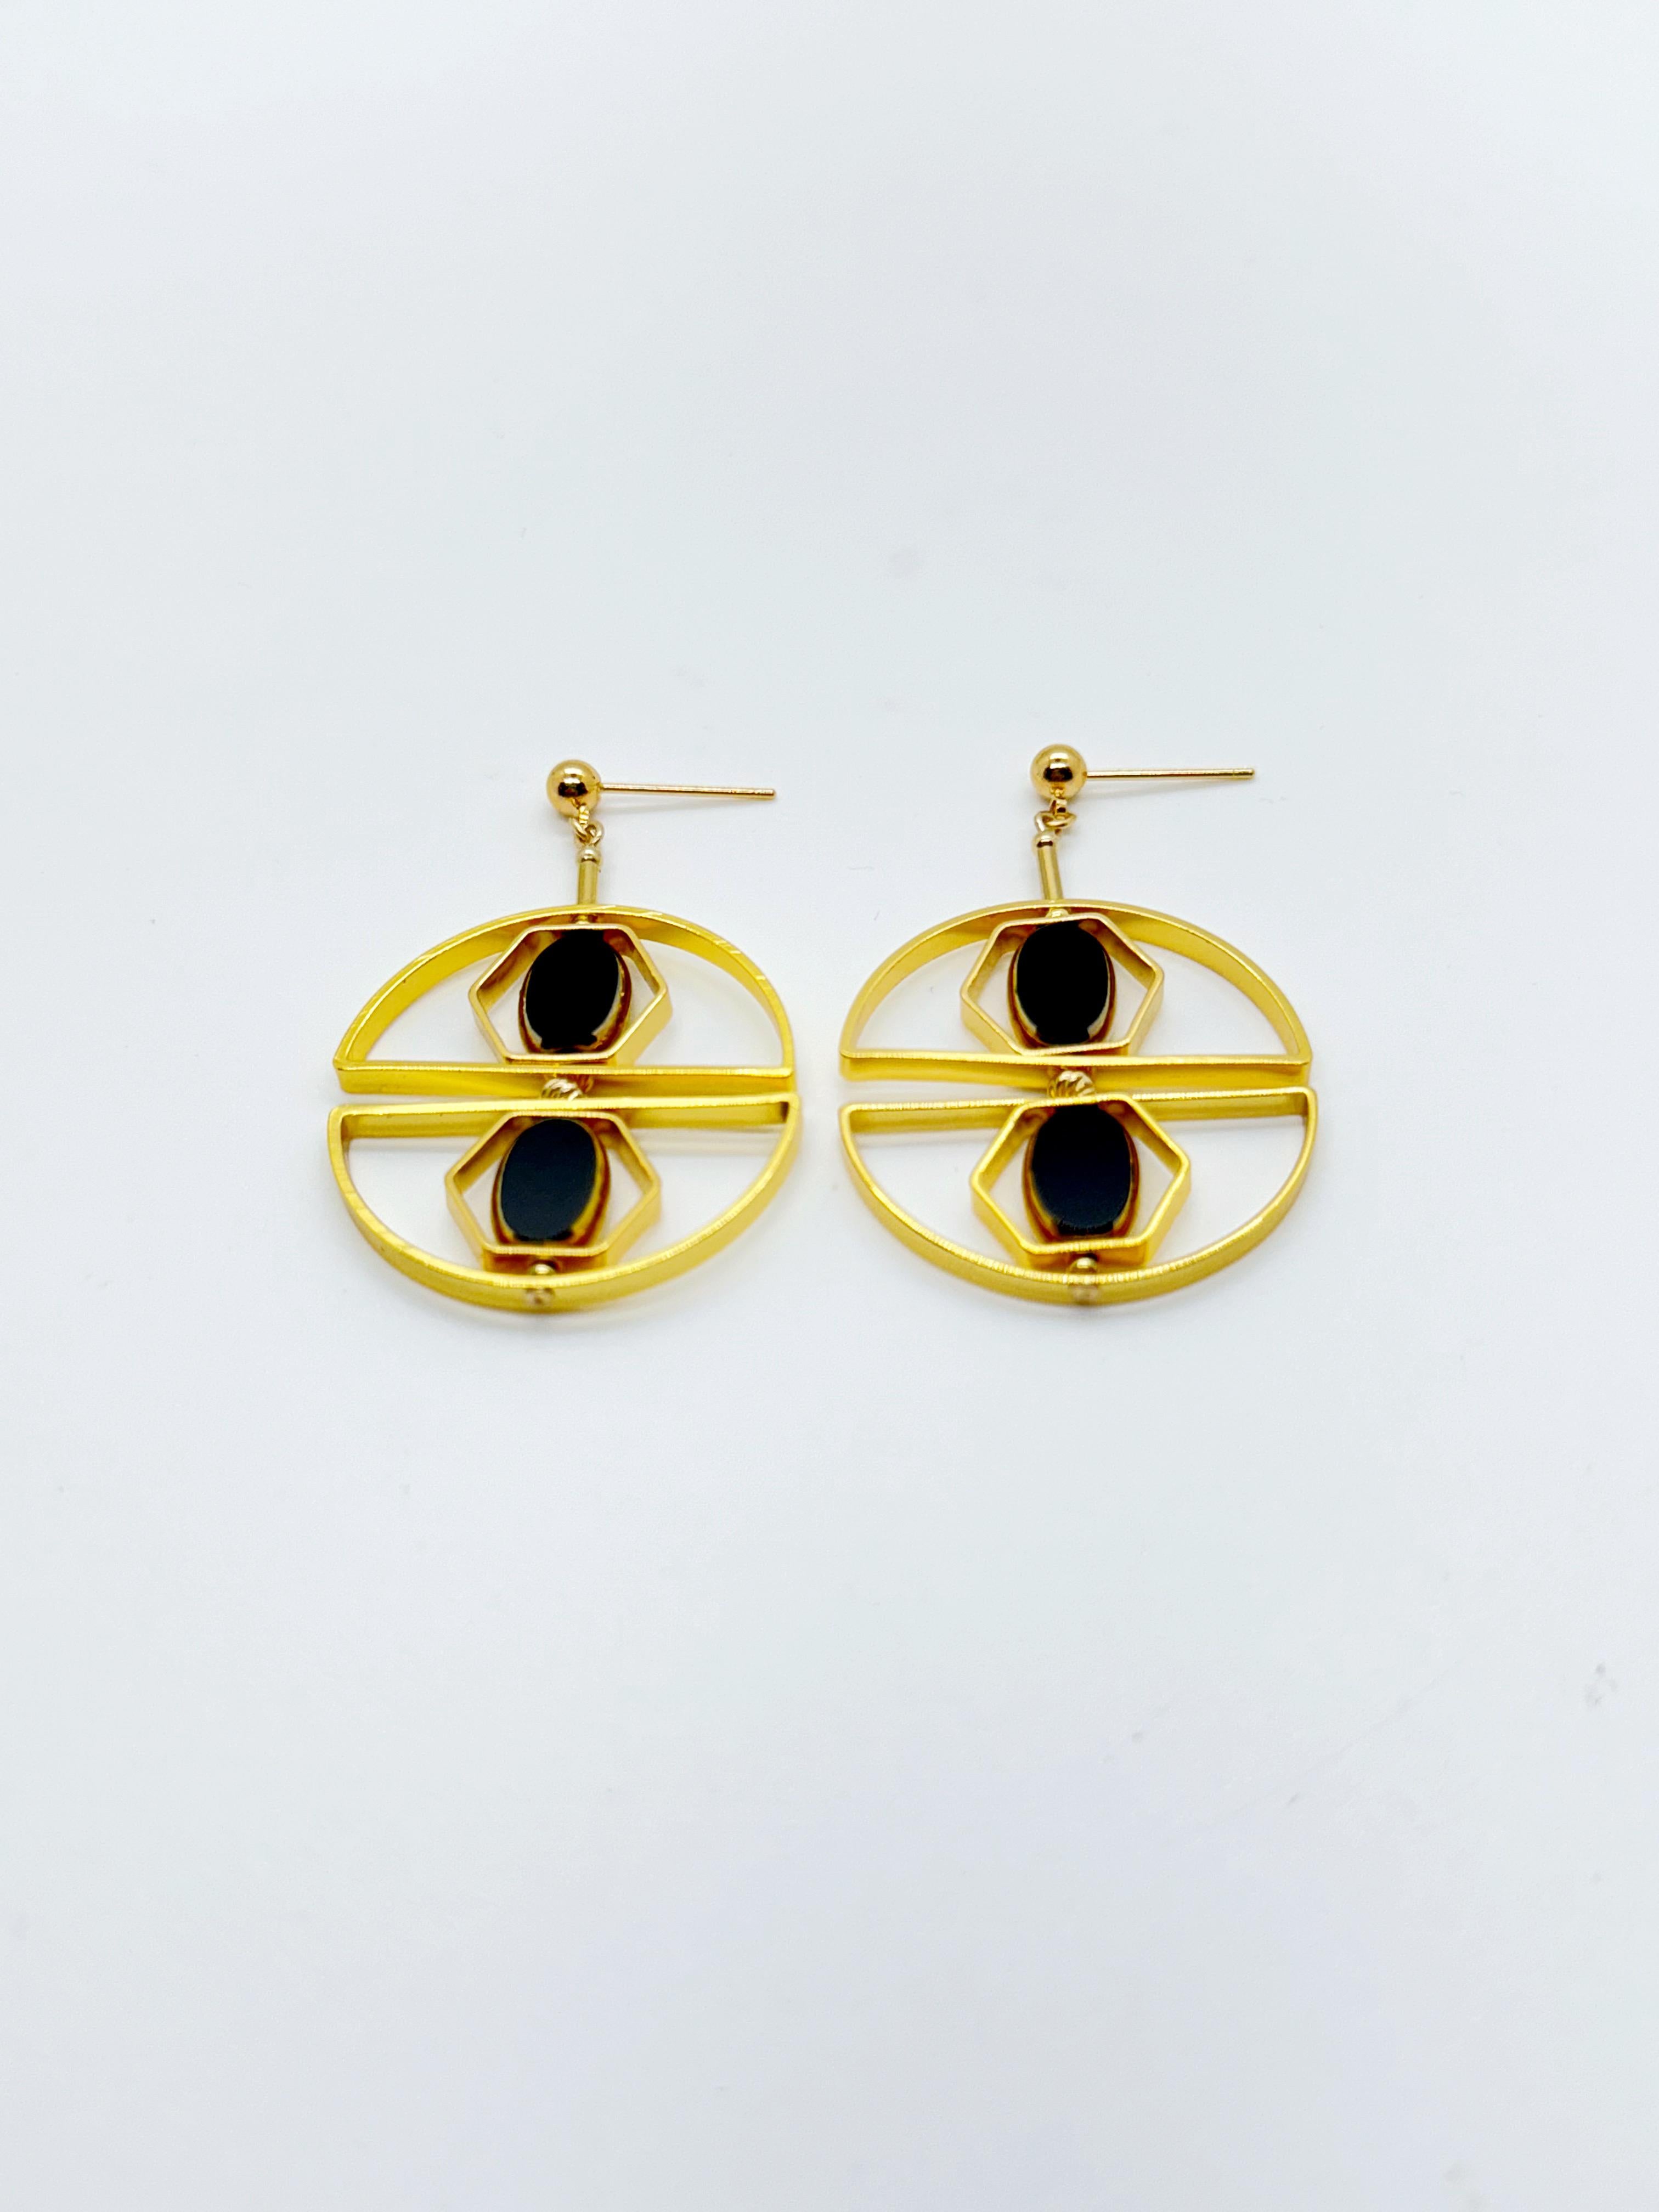 The earrings are light weight and are made to rotate and reposition with movement.

The earrings consist of black new old stock vintage German glass beads that are framed with 24K gold. The beads were hand-pressed during the 1920s-1960s in